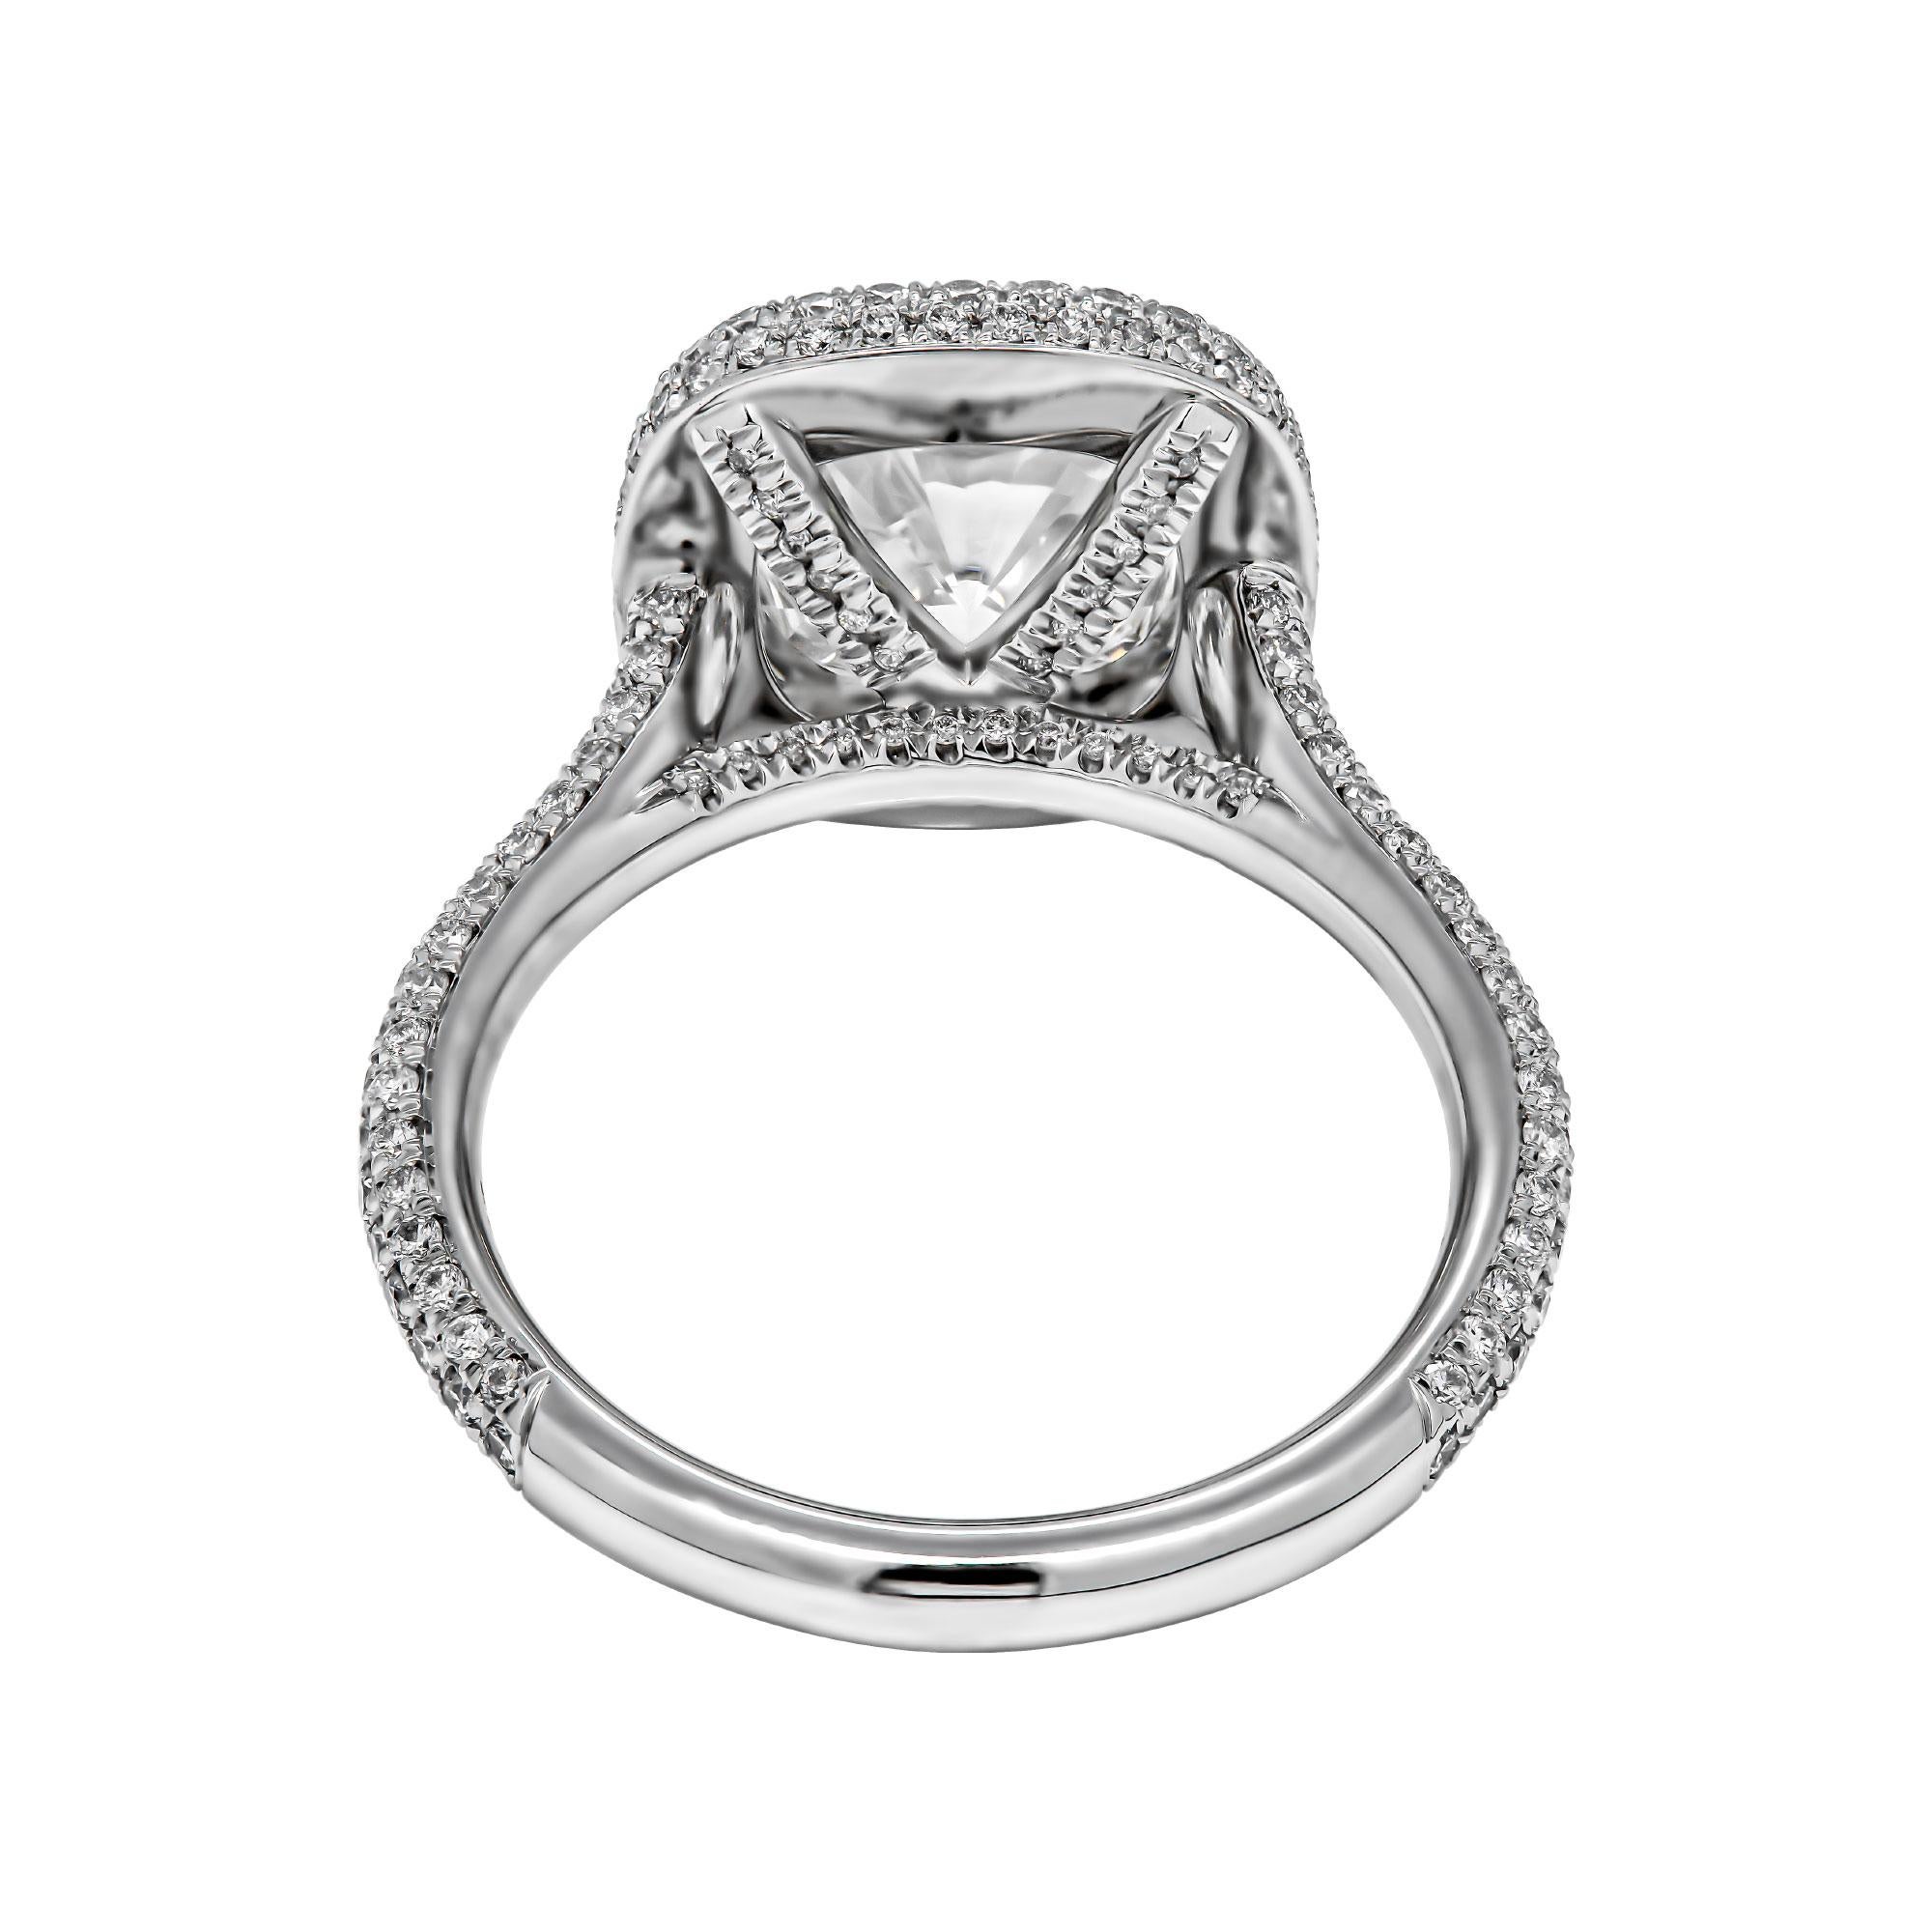 Modern GIA Certified Engagement Ring with 3.03 Carat Cushion Cut Diamond